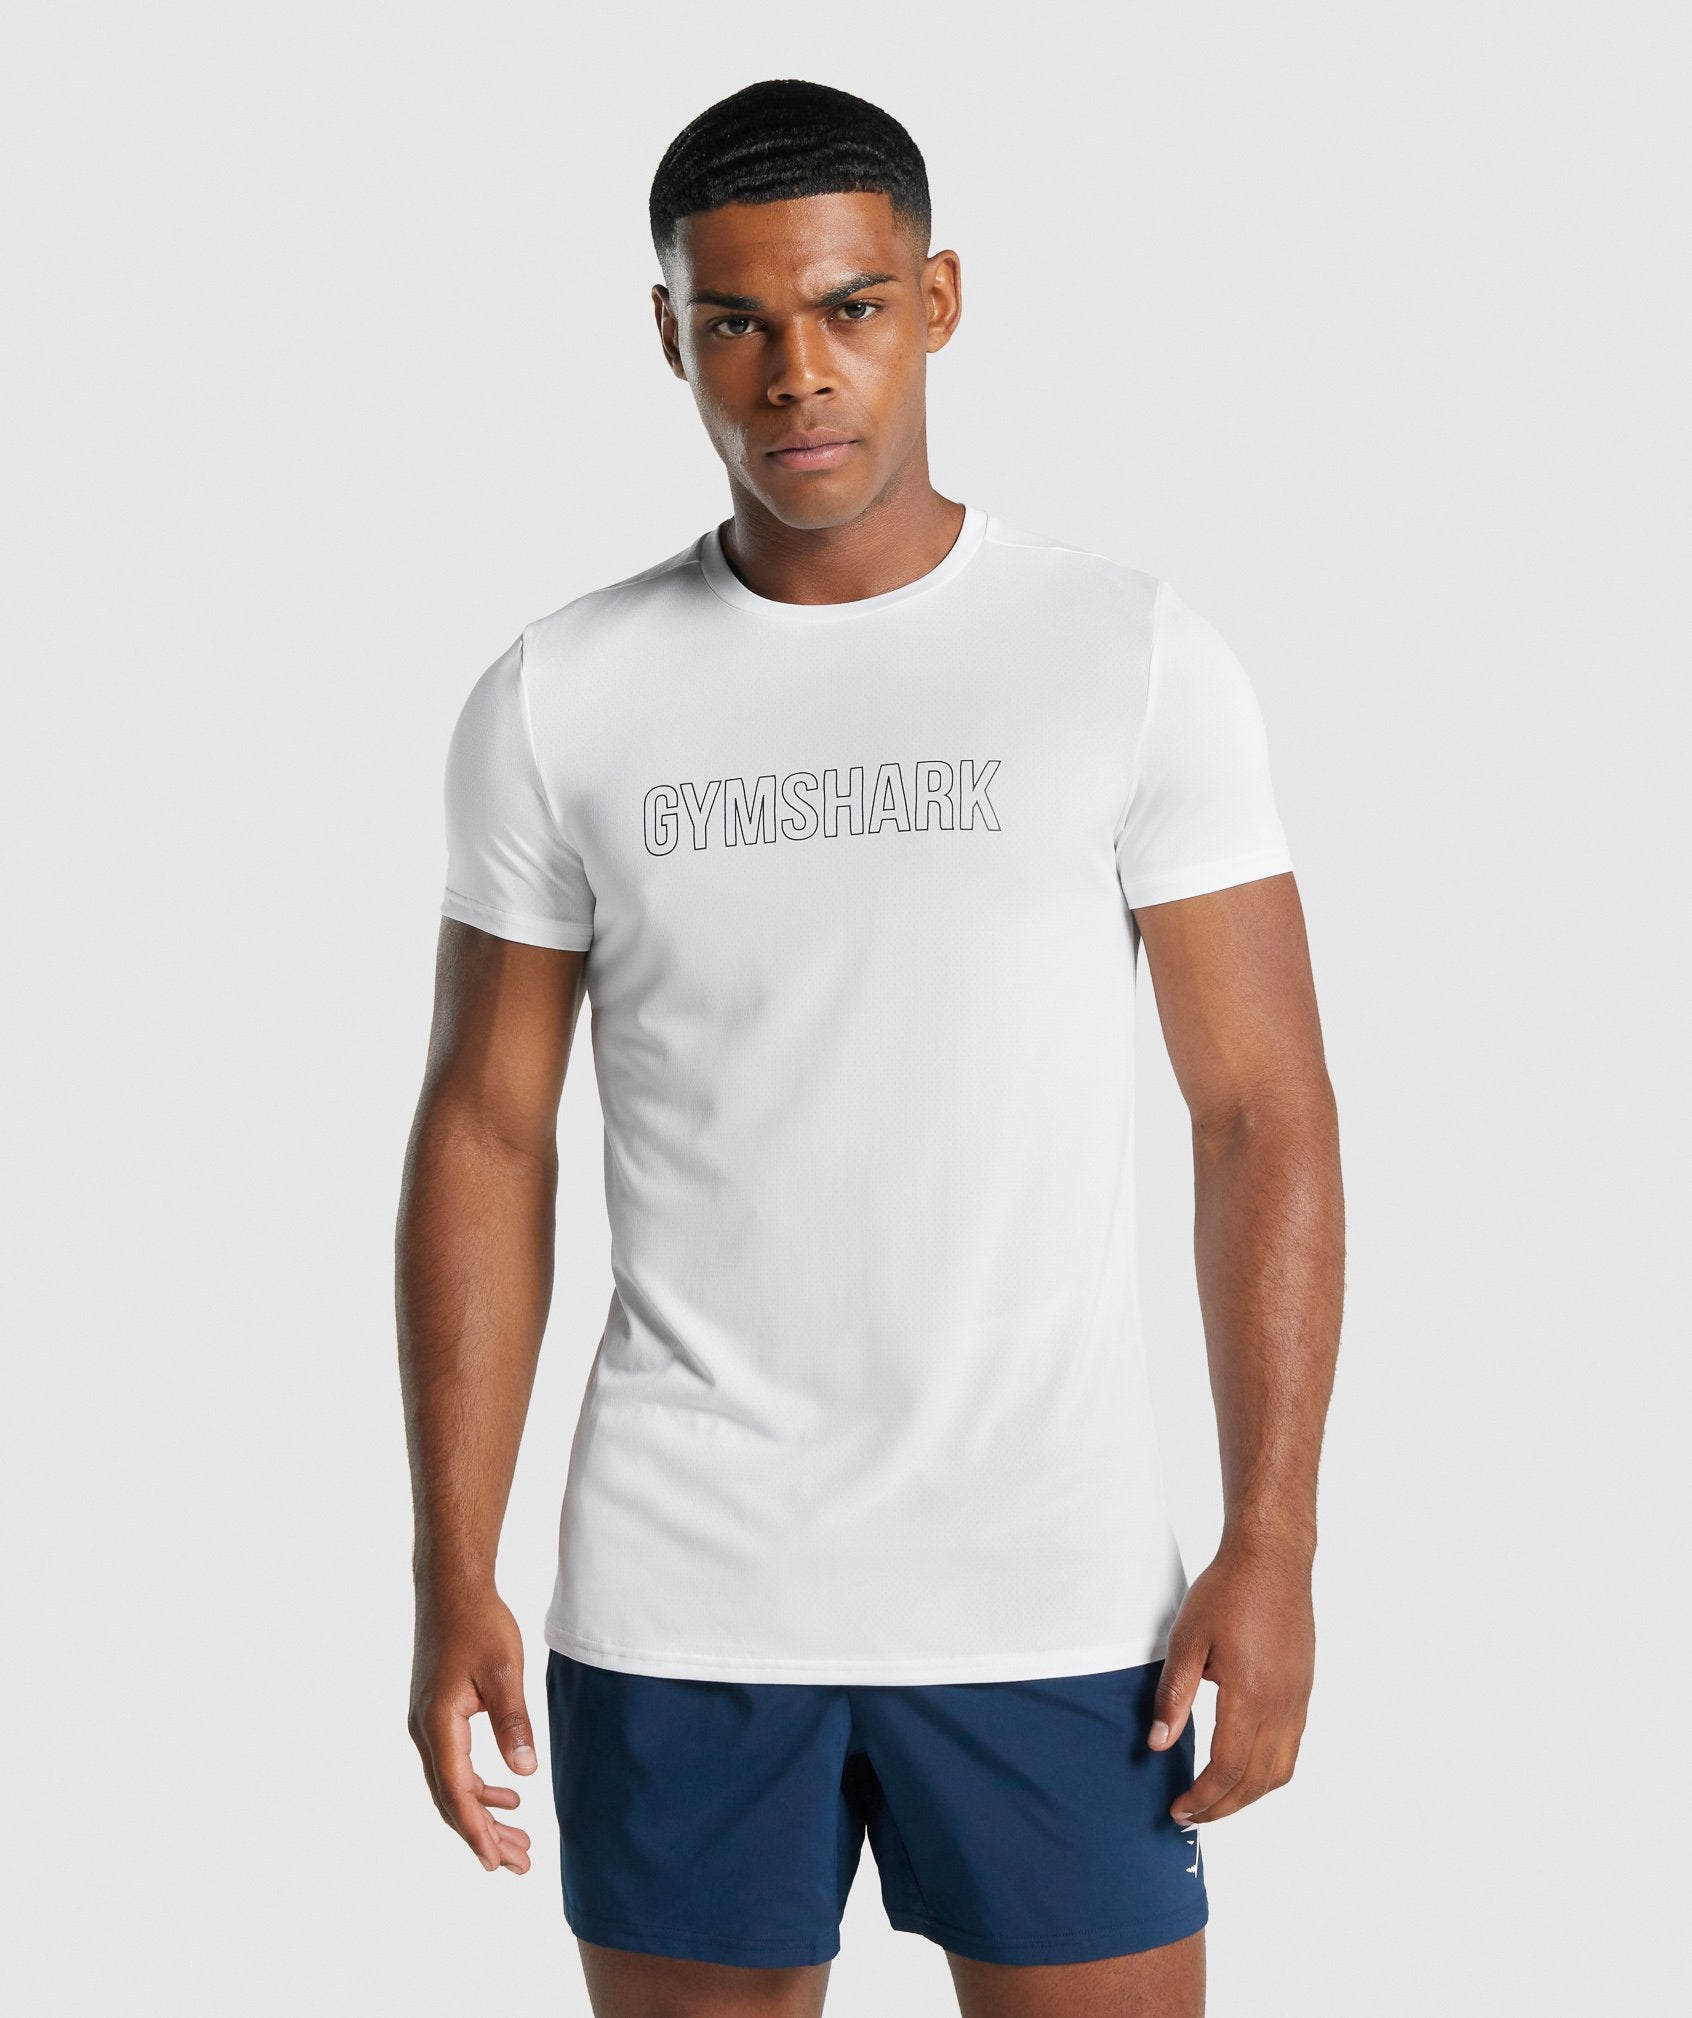 Arrival Graphic T-Shirt in White - view 1